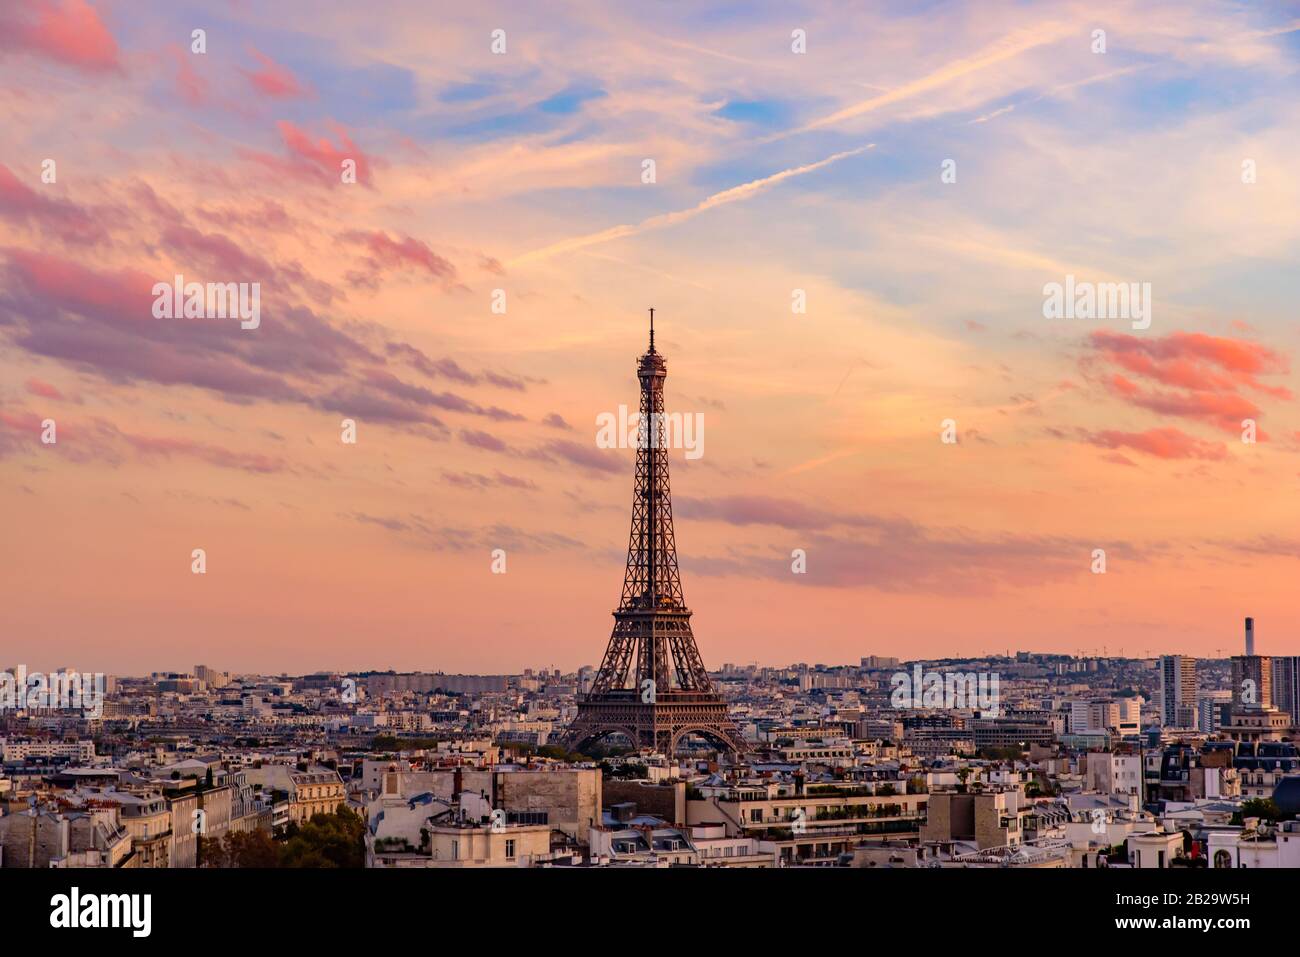 Eiffel Tower at sunset time with colorful sky and clouds, Paris, France Stock Photo